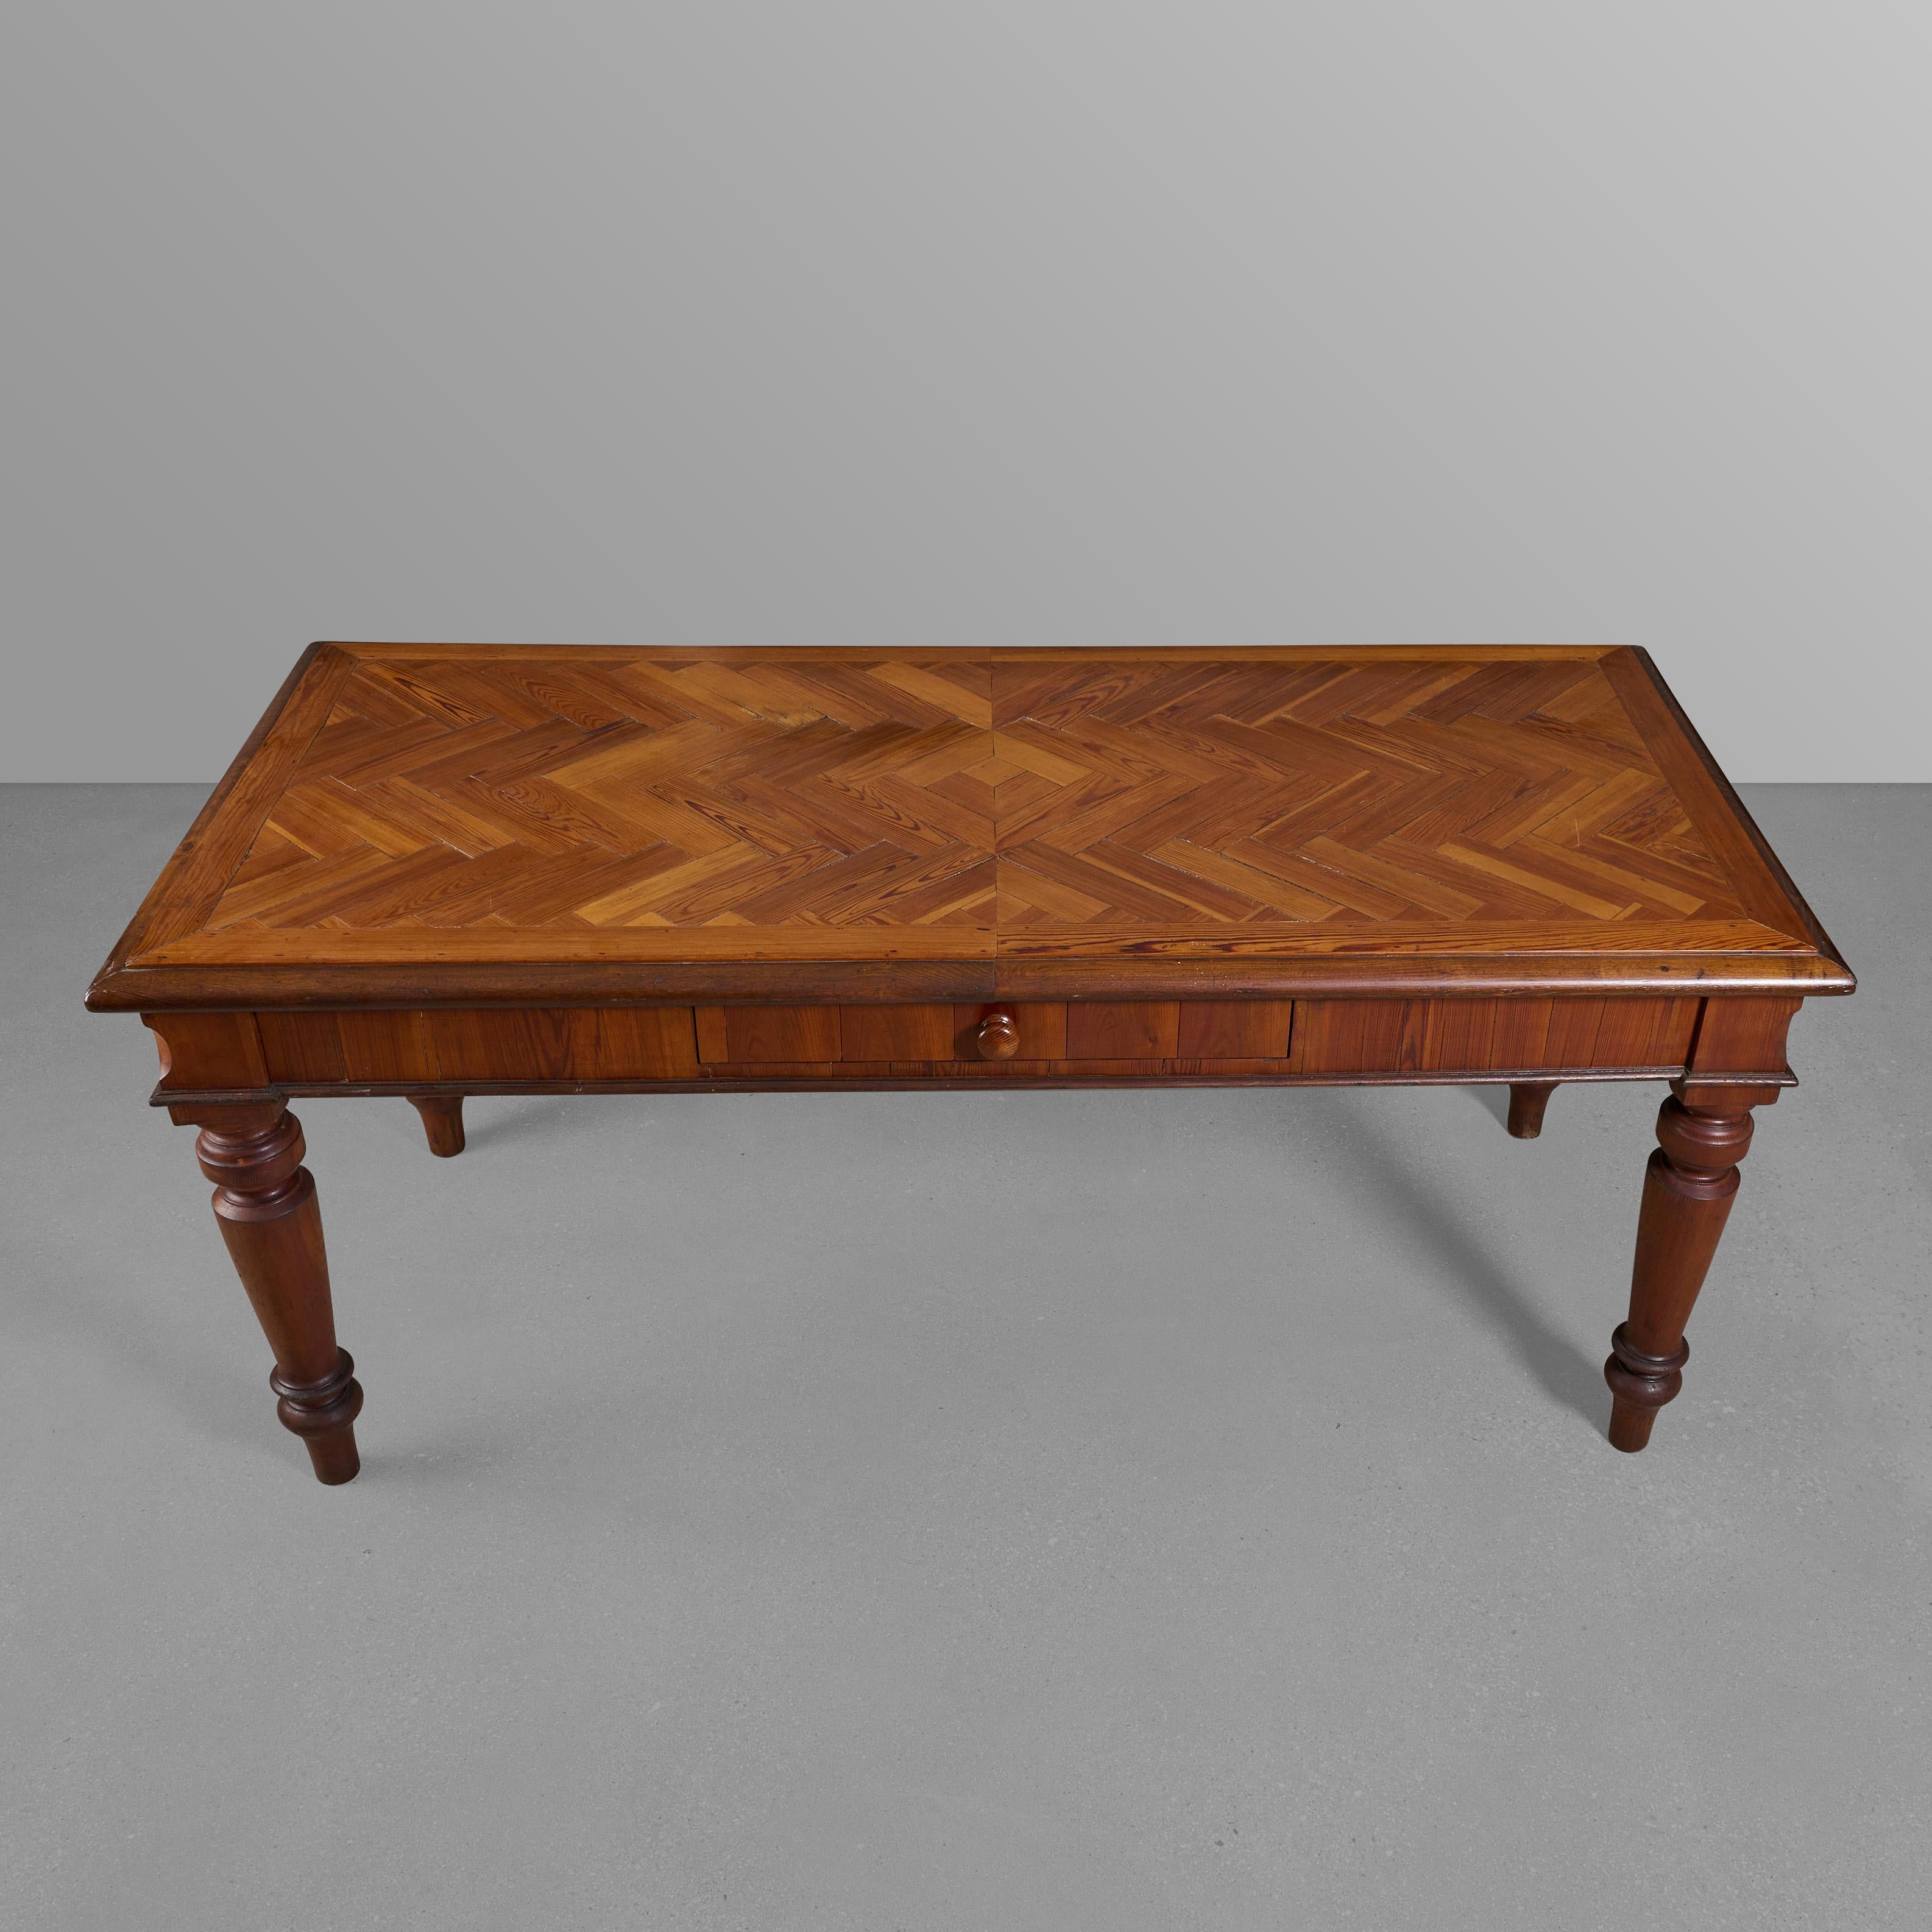 Wood Table/Desk with Herringbone Design For Sale